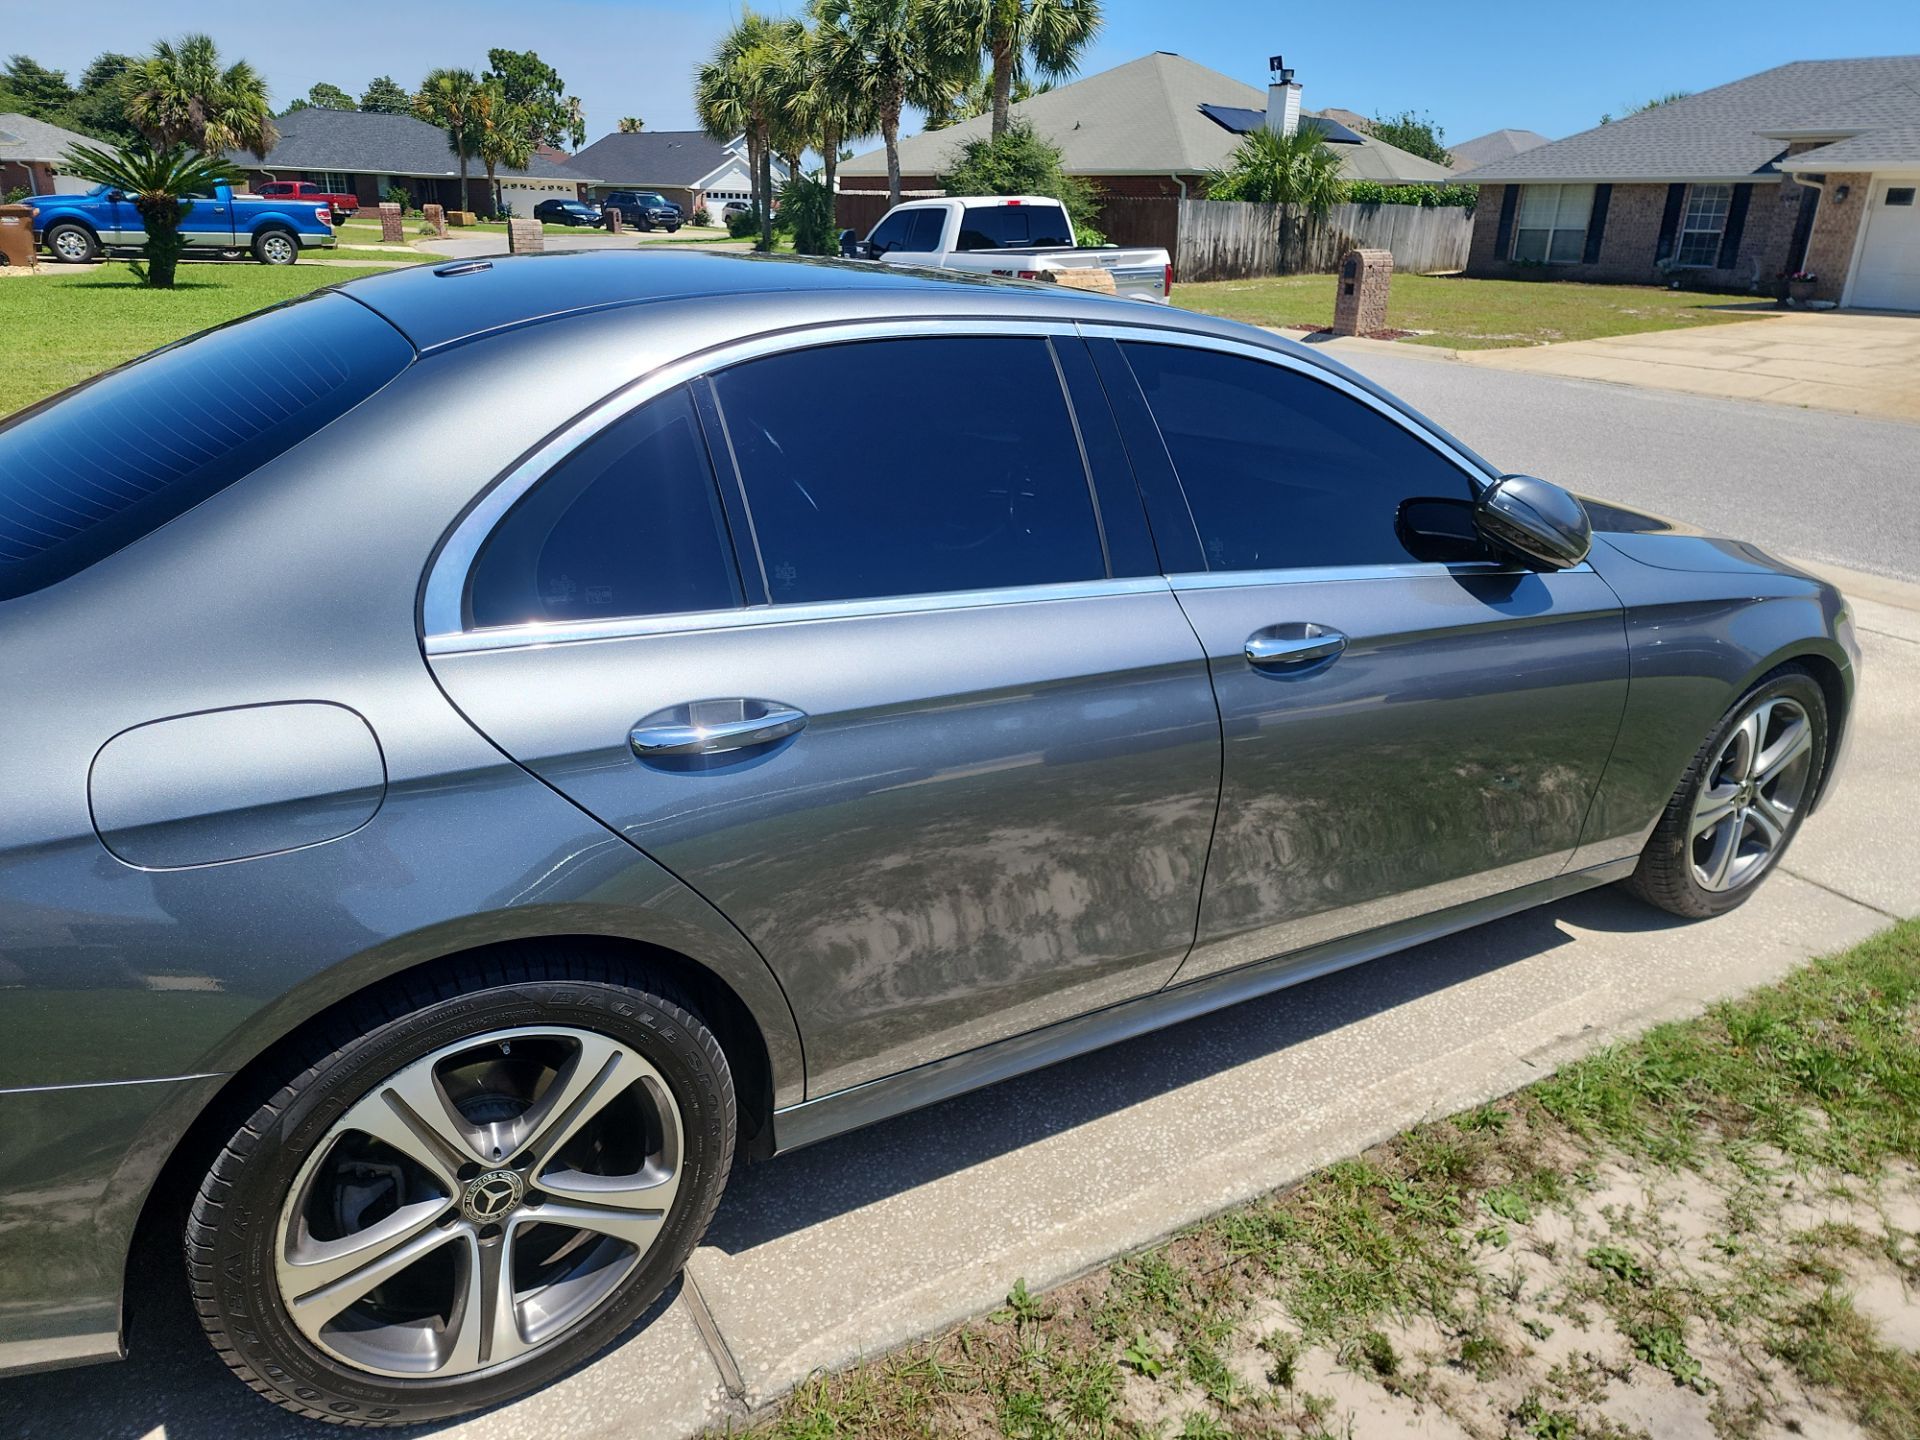 the car shown in the photo has had its windows tinted this is a service provided by window tinting companies such as t's window tinting based in pensacola florida the tint appears to be applied uniformly across all the windows which helps in reducing glare blocking uv radiation improving privacy and enhancing the aesthetic appeal of the vehicle